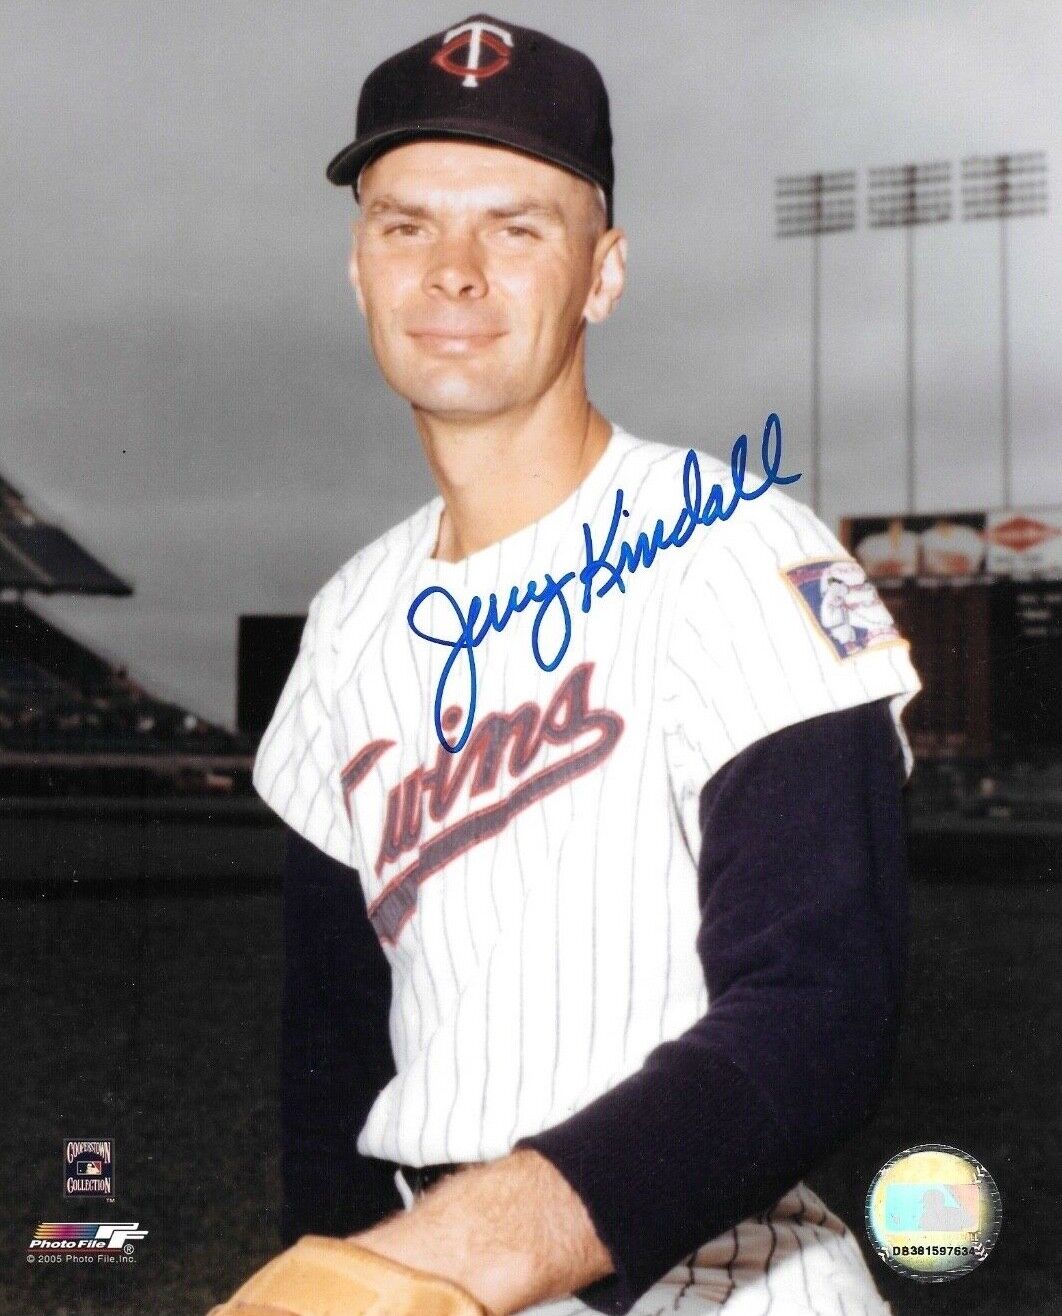 * JERRY KINDALL * signed 8x10 Photo Poster painting * MINNESOTA TWINS * COA * 1